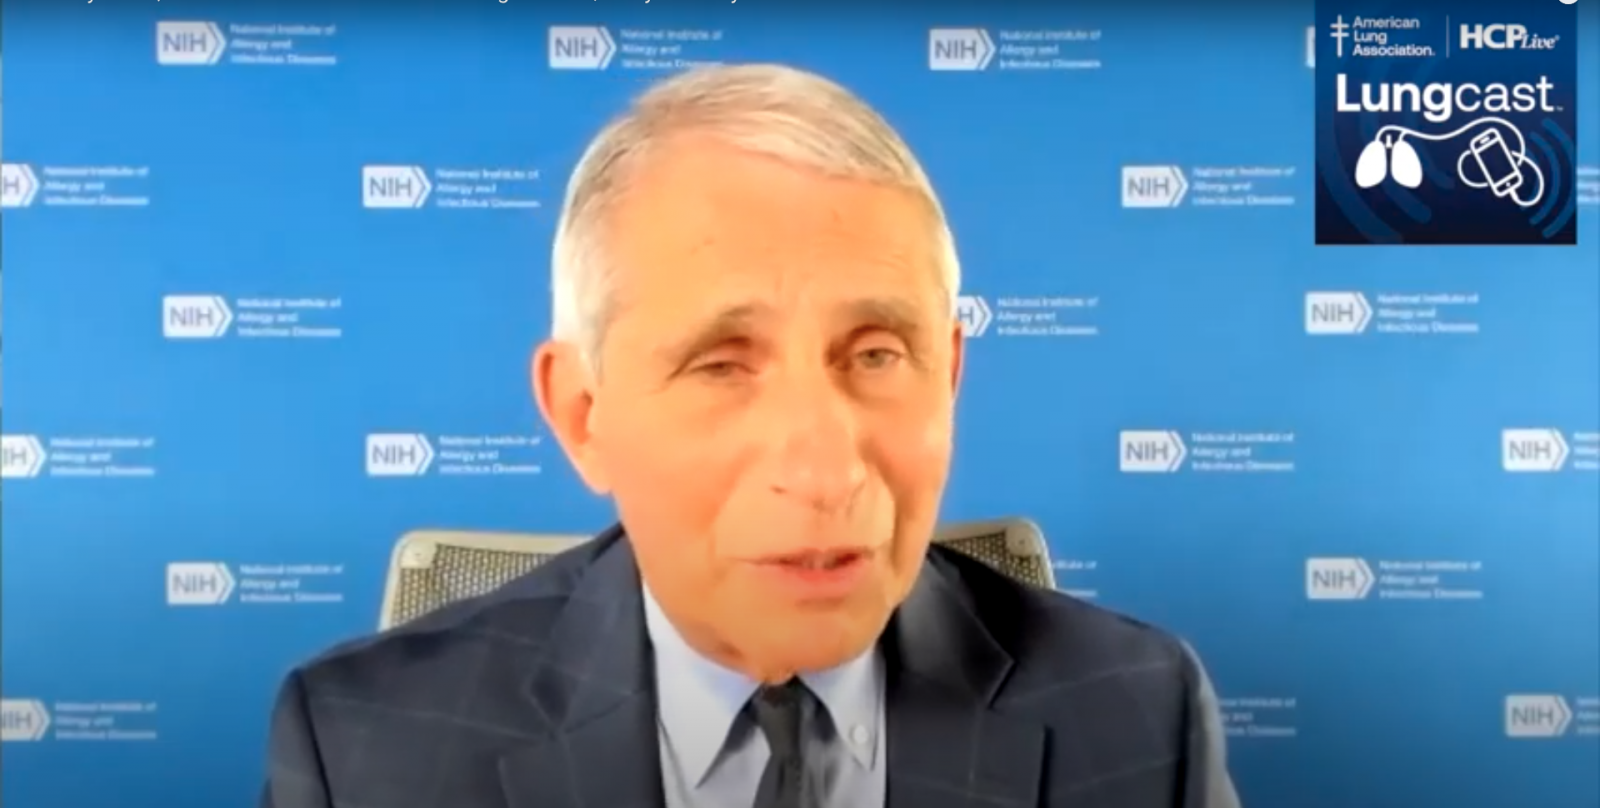 Anthony Fauci, MD: How COVID-19 Vaccines Progressed Quickly and Safely